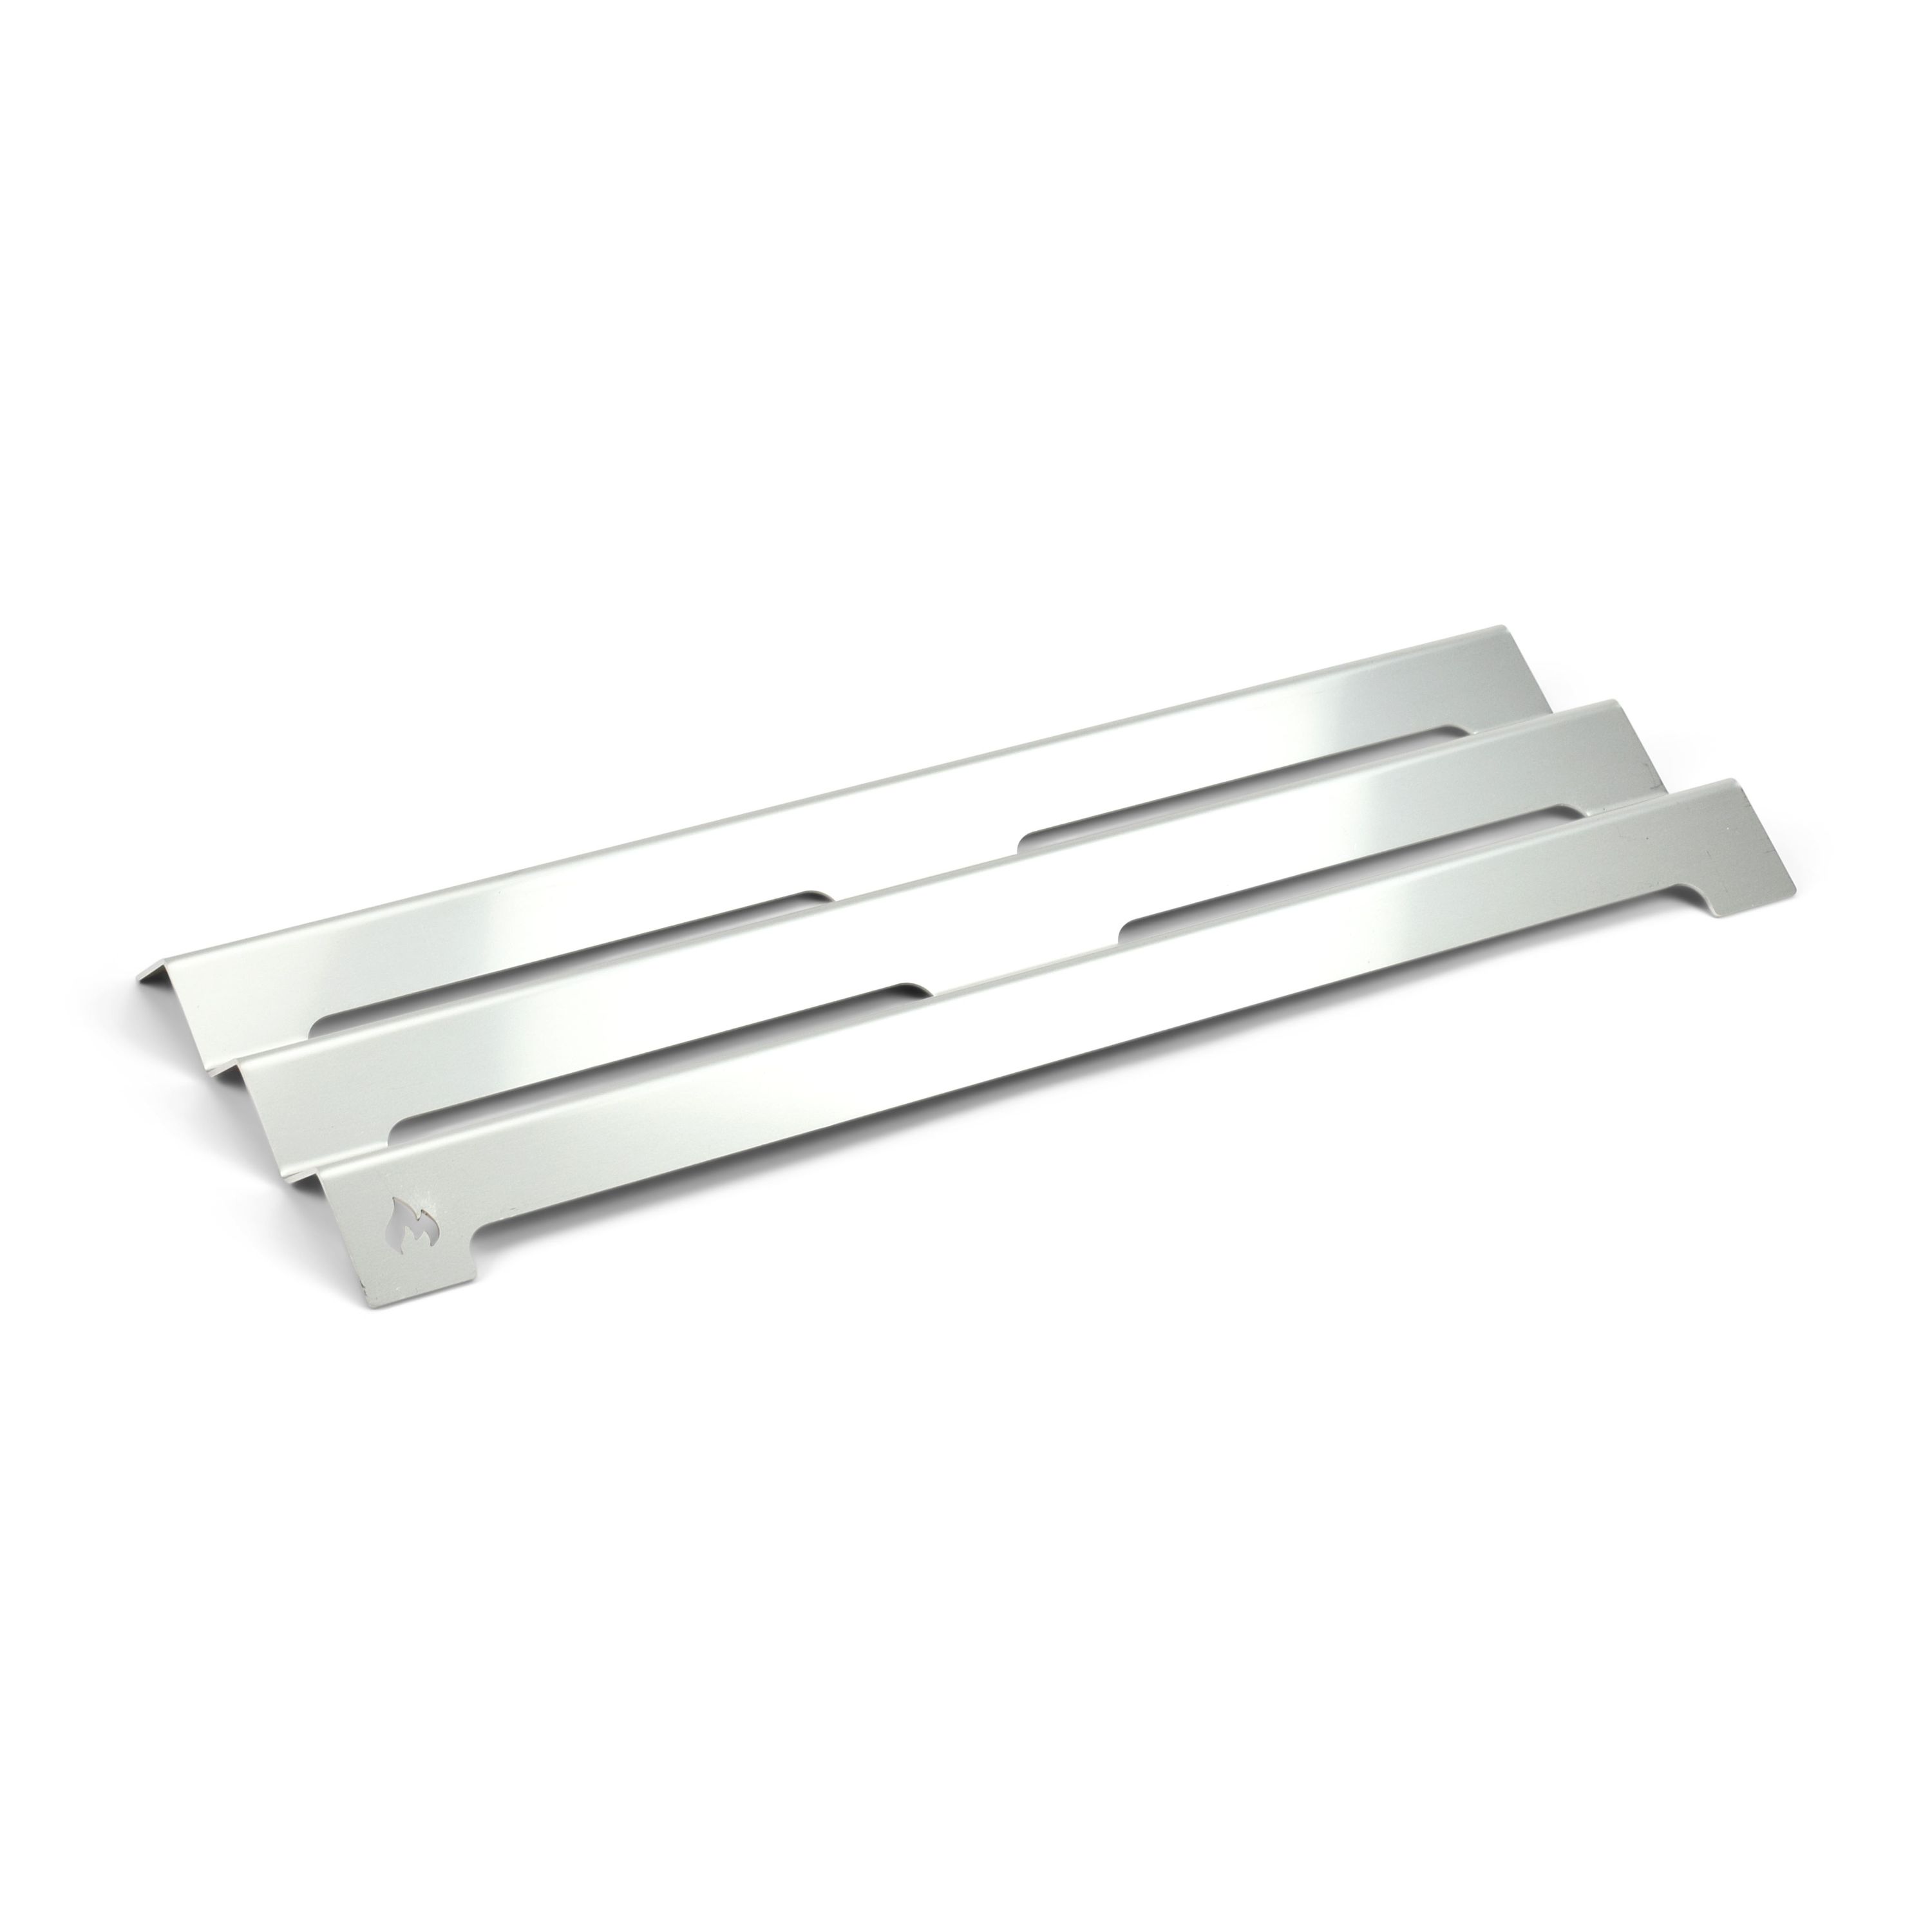 Stainless steel aroma rail for Napoleon Triumph T325 T410 and T495